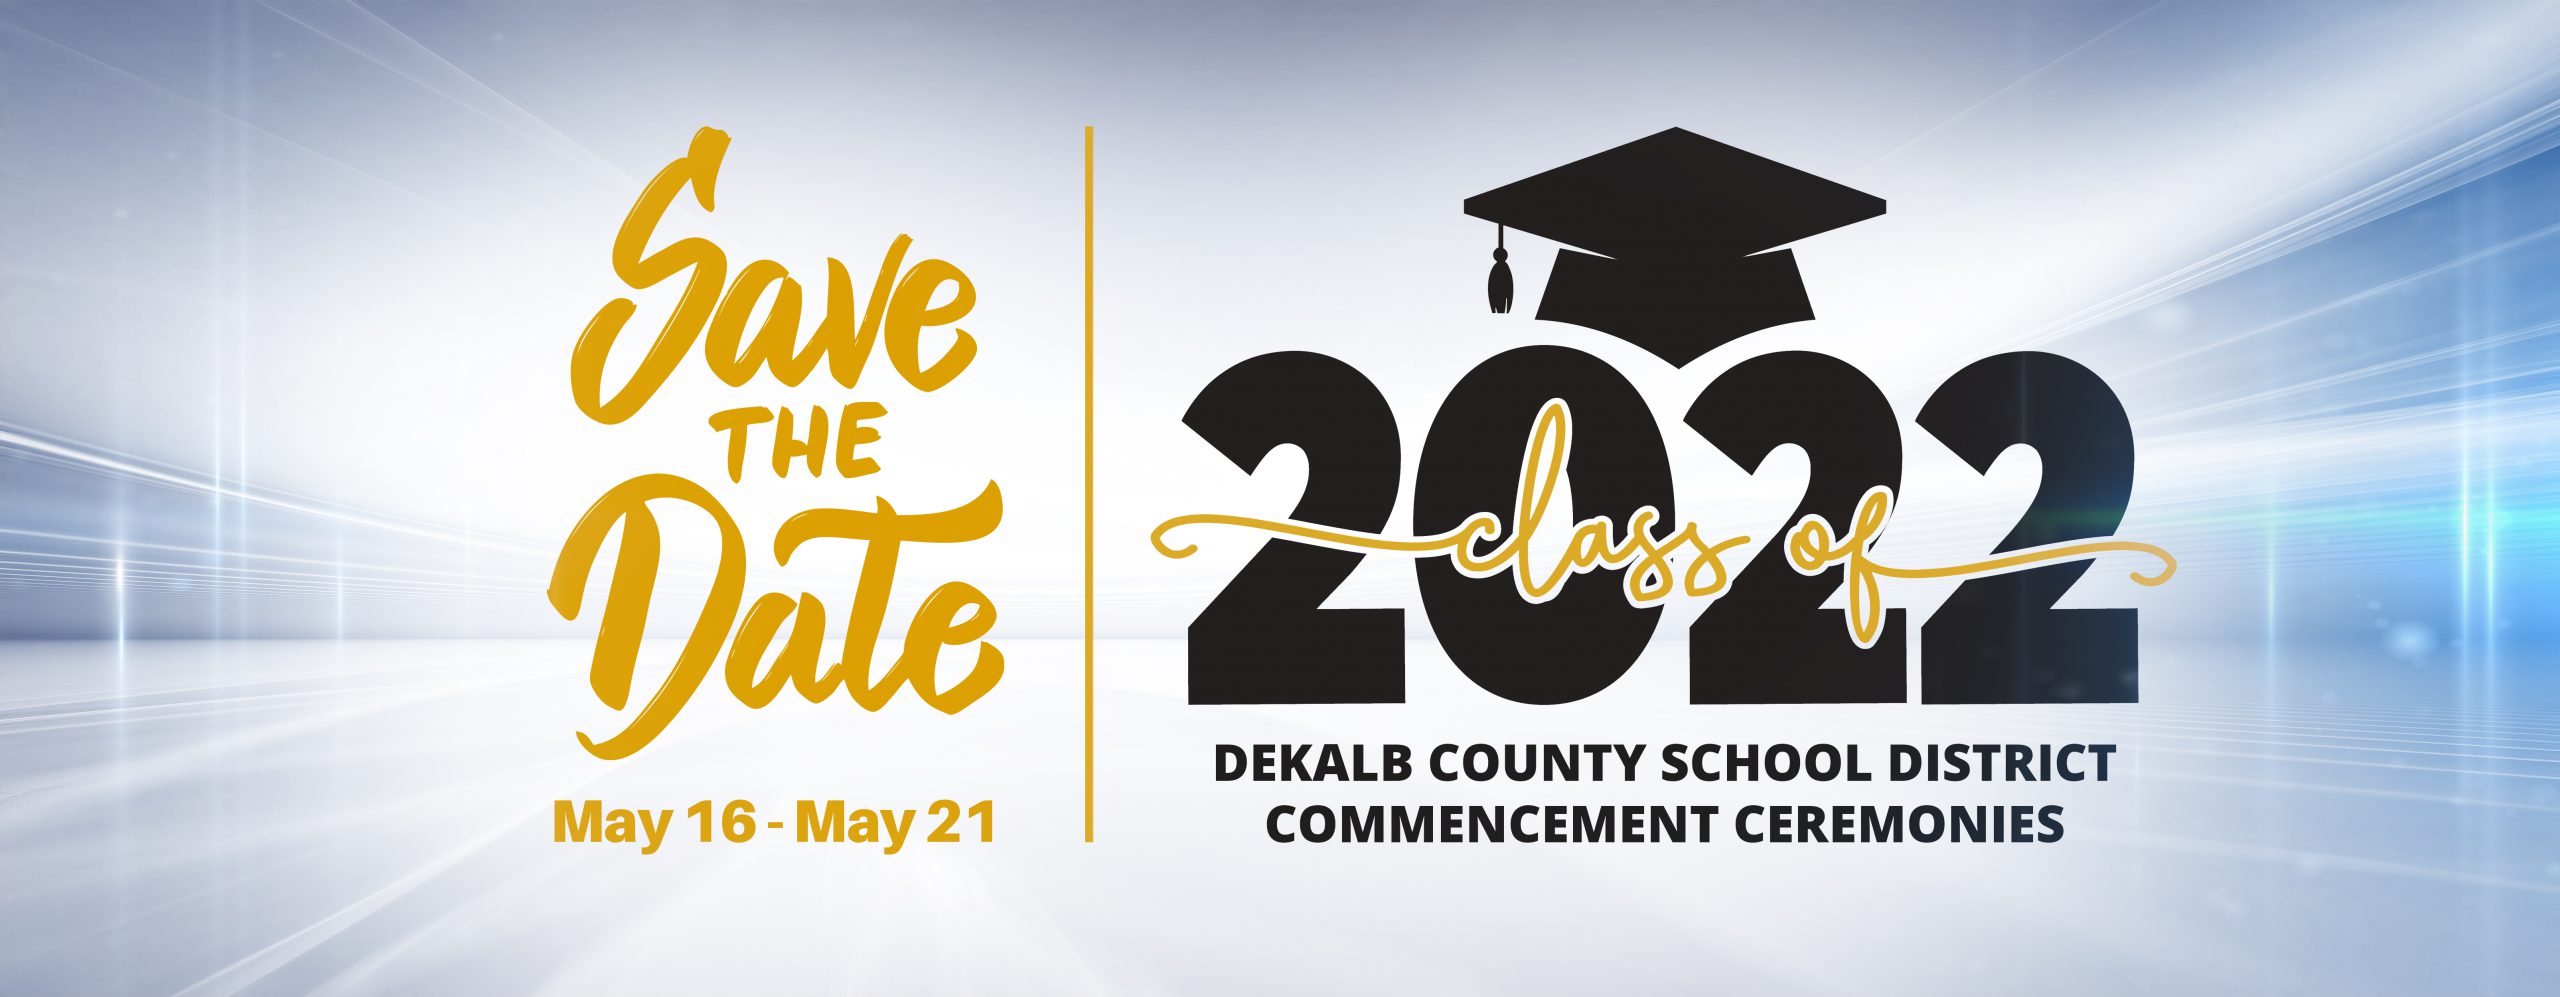 save the date for the 2022 graduation ceremonies graphic